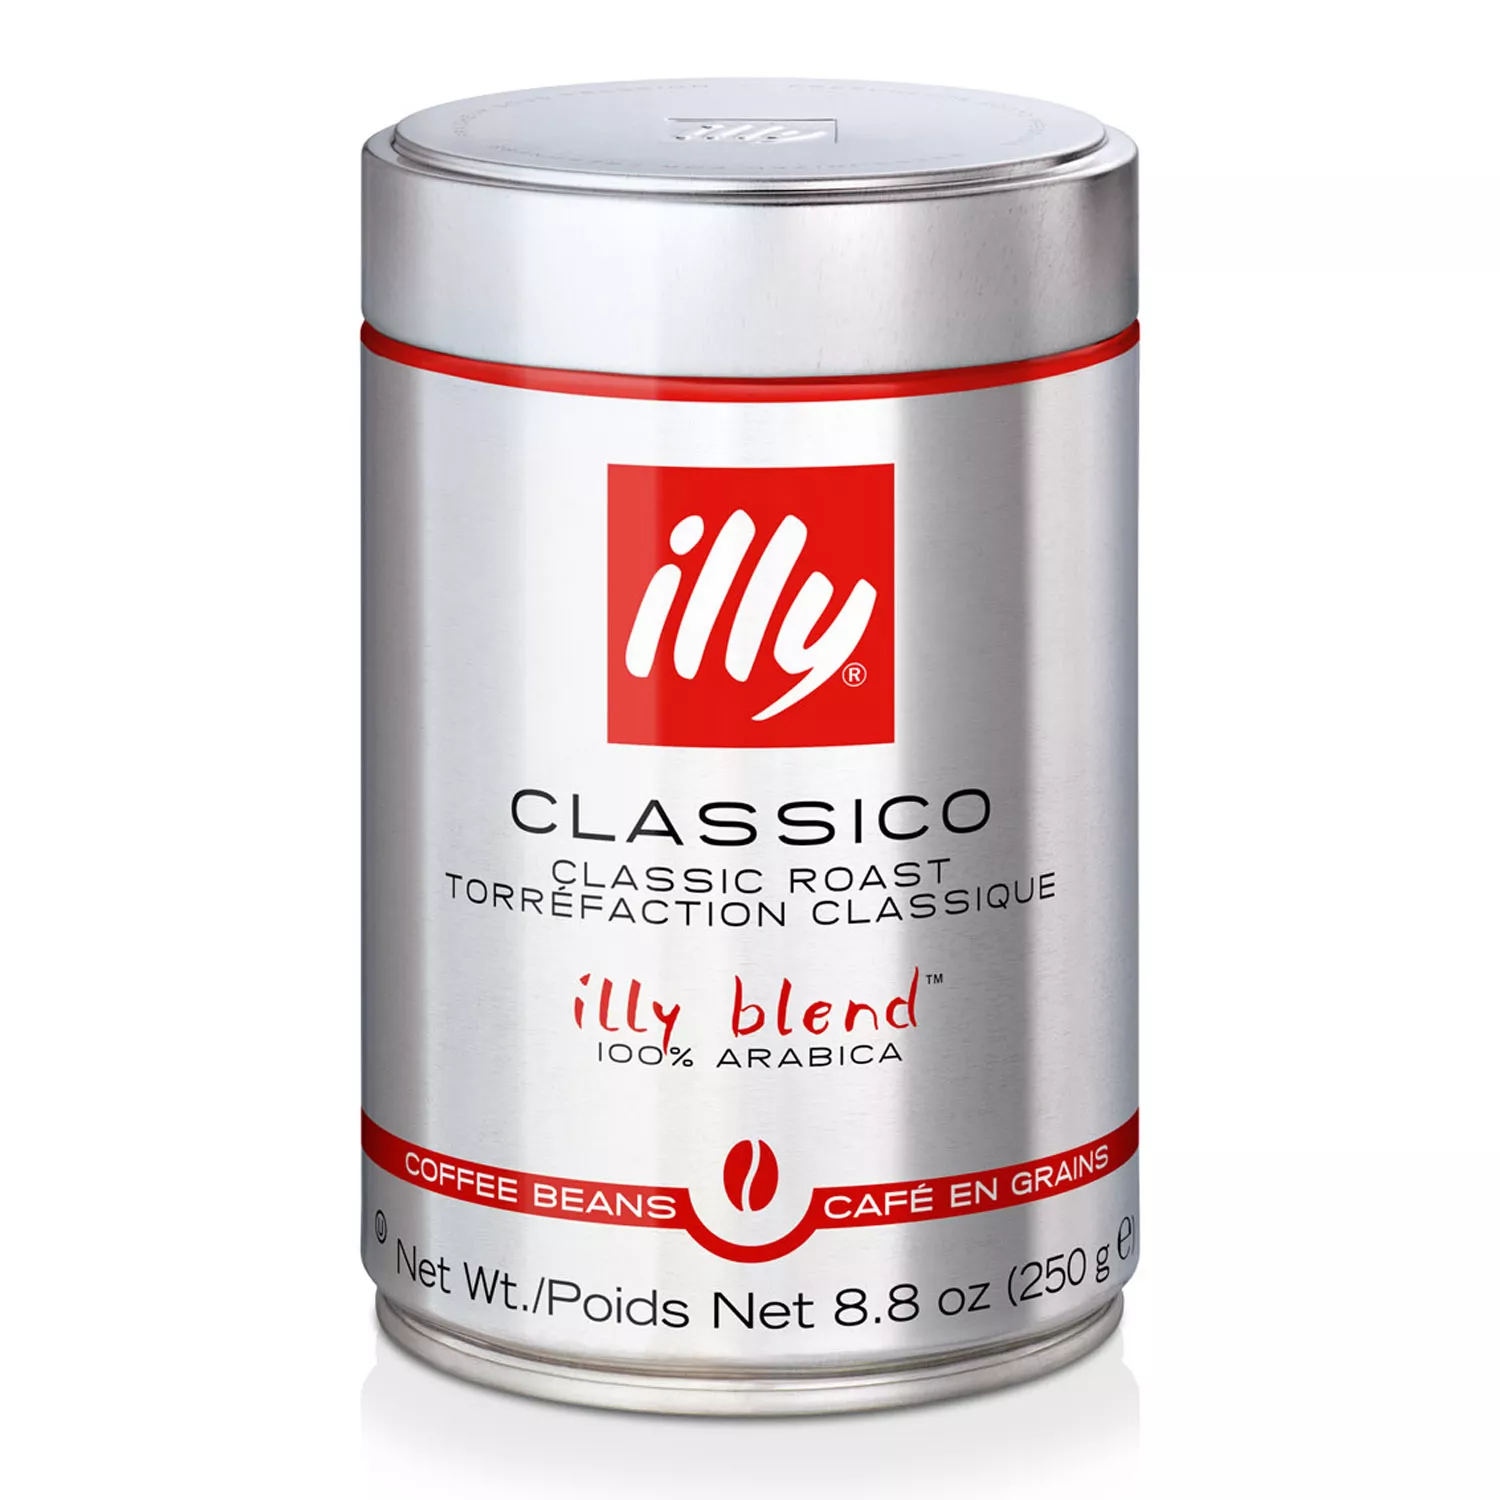 illy iperespresso 180 Coffee Capsules - All Blends